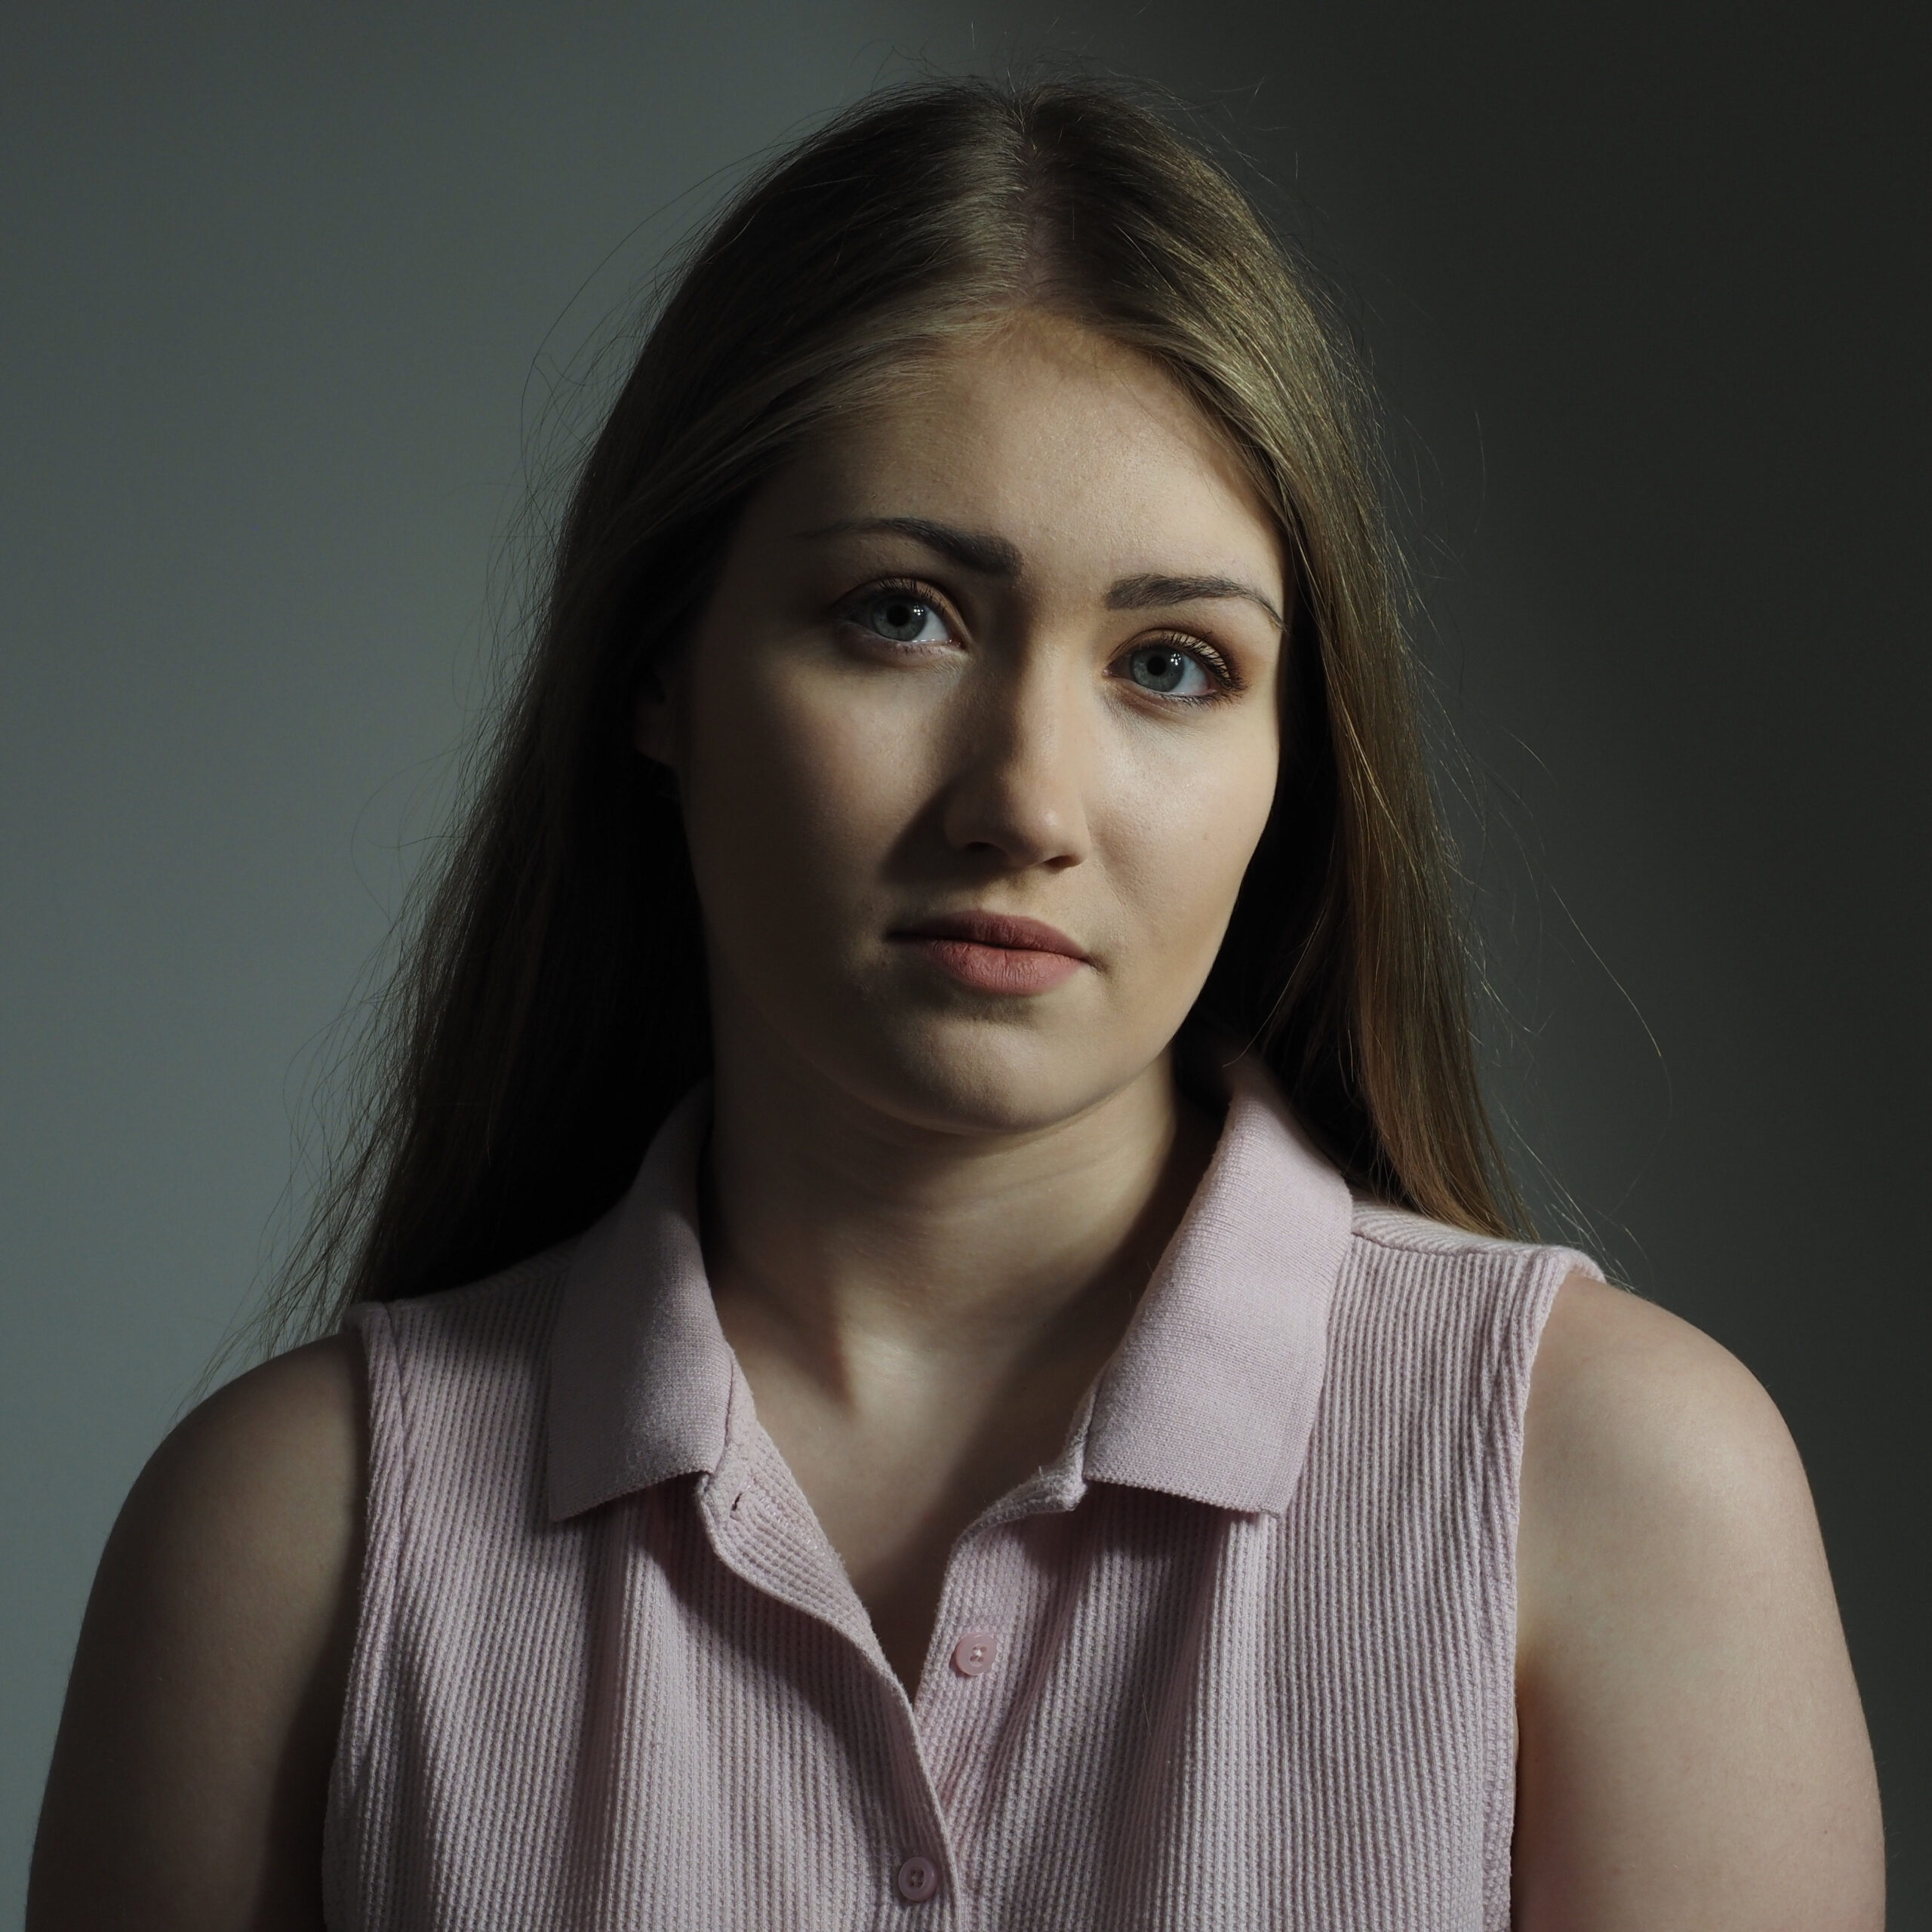 Portrait of a young woman, head tilted, looking serene. Partially lit background.